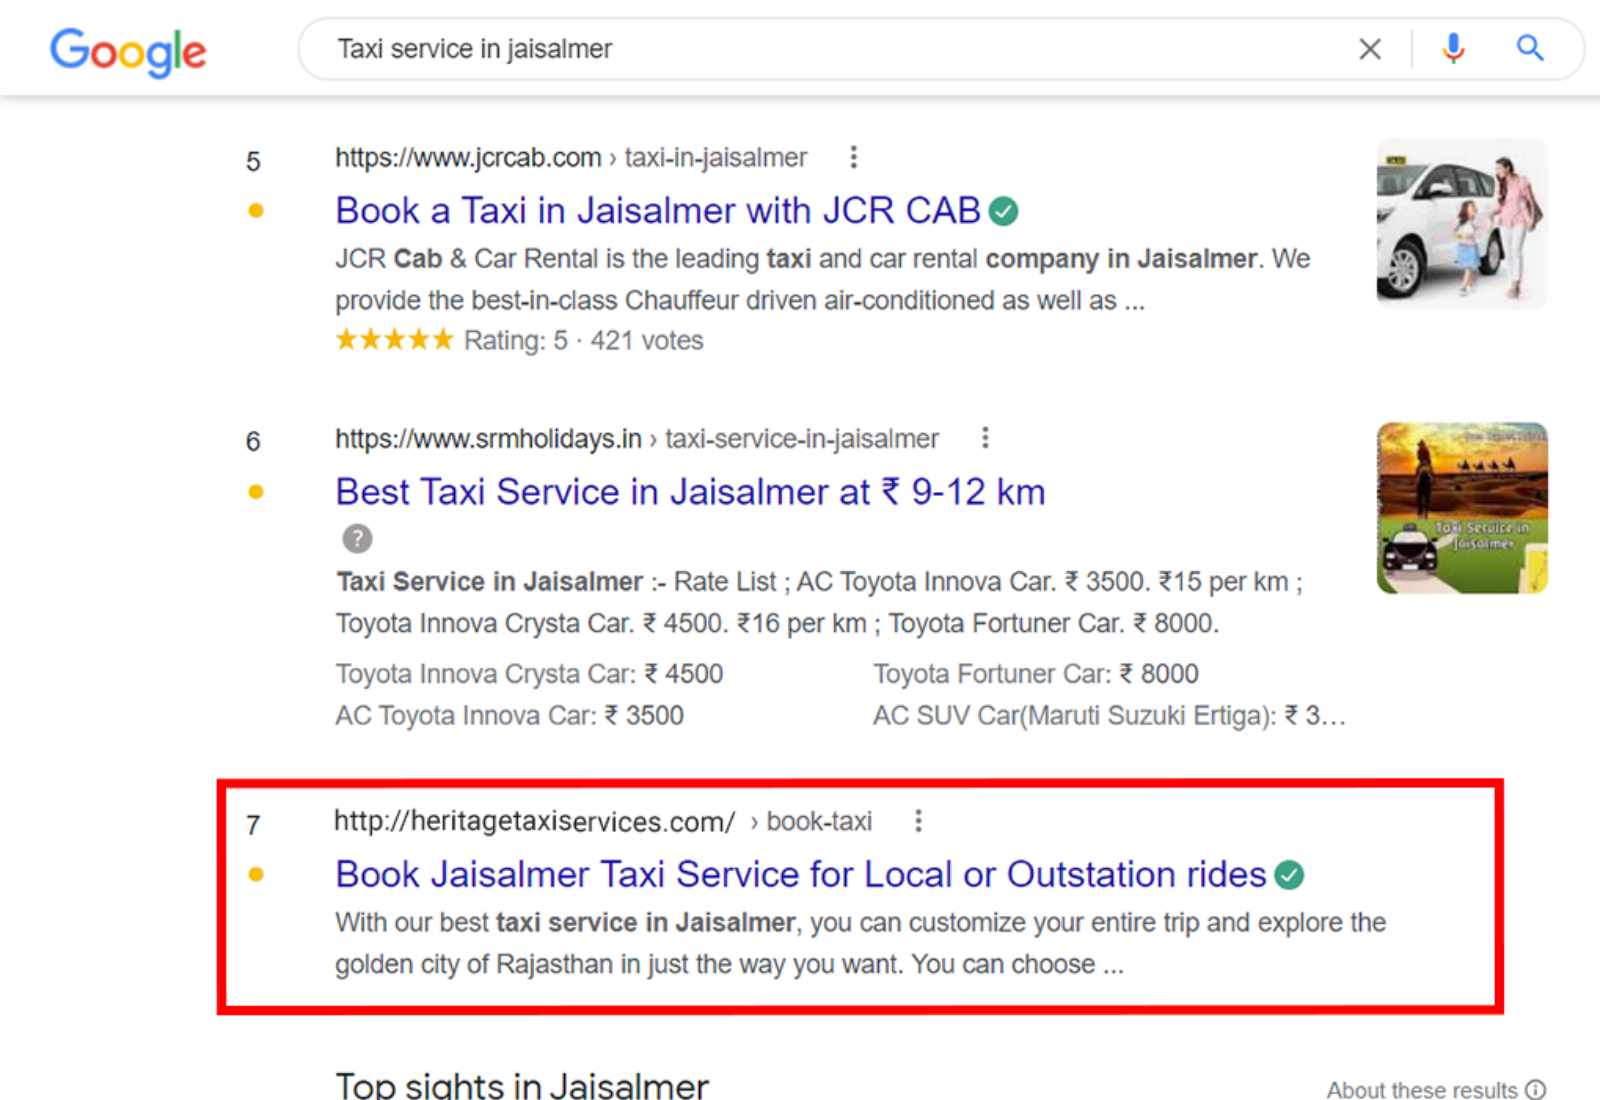 heritage-taxi-services-seo-1.png